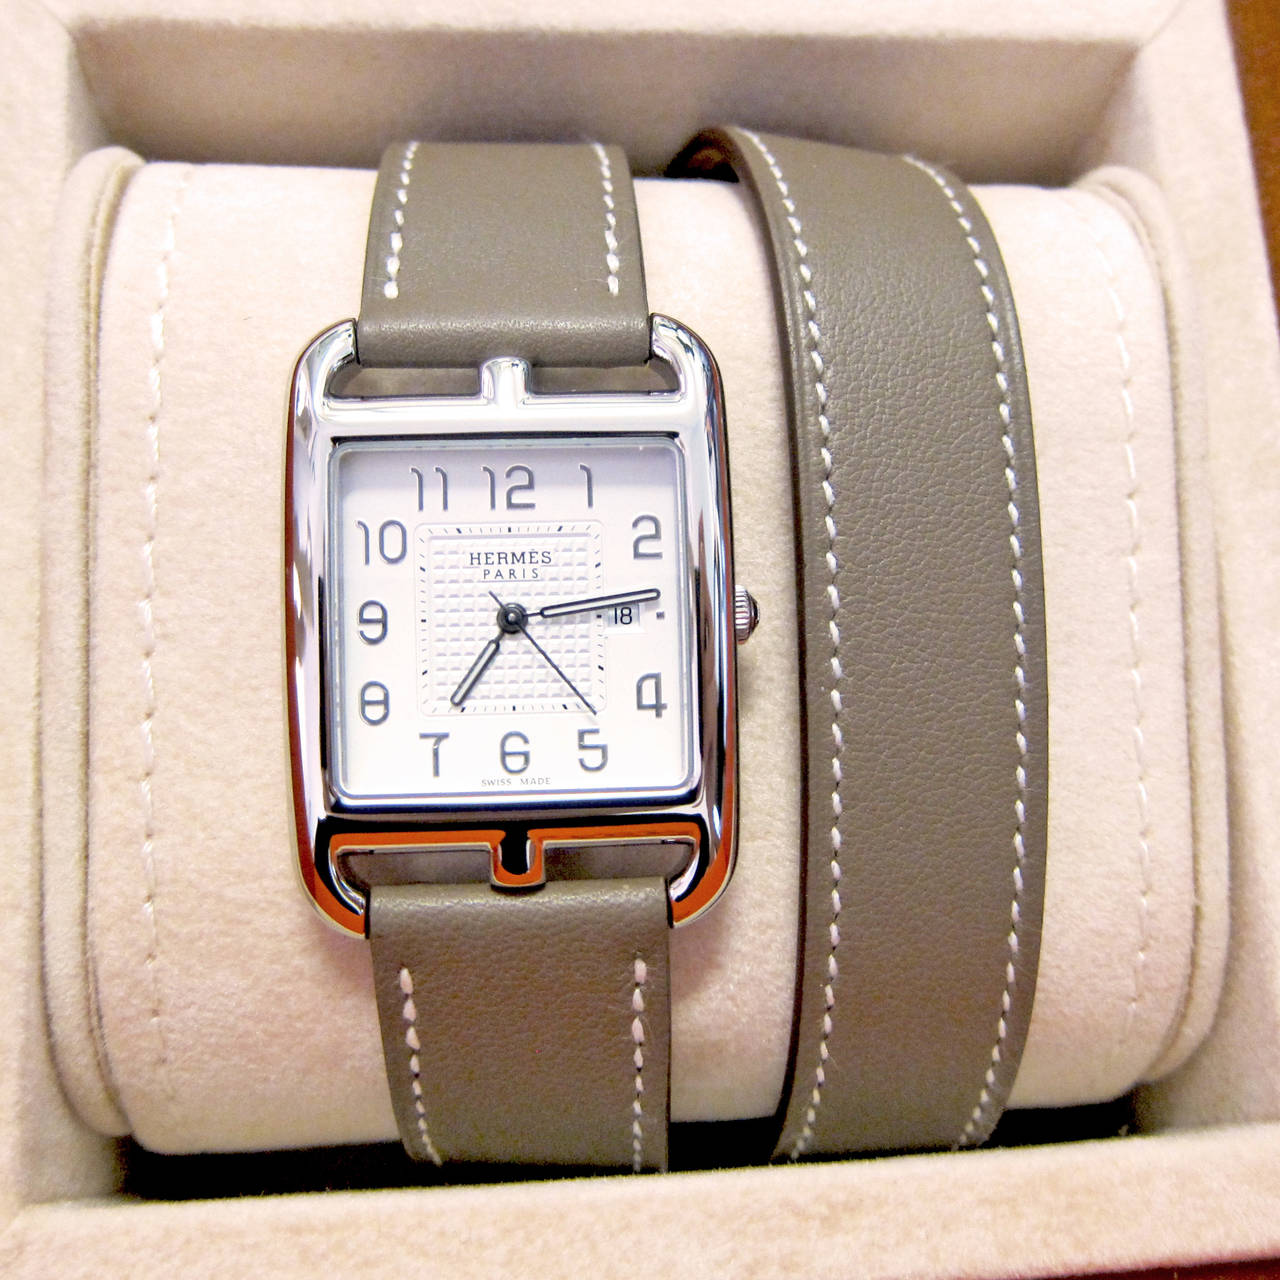 Hermès Etoupe Cape Cod Double Tour GM Auto Double Tour Watch

Long Double-Tour Etoupe (Taupe) Calfskin Leather Strap
GM Silvered Dial 29x29mm, Quartz Movement
Perfect Gift - store fresh 
Brand New in Box.  Never Worn.  R stamp.
Comes full set